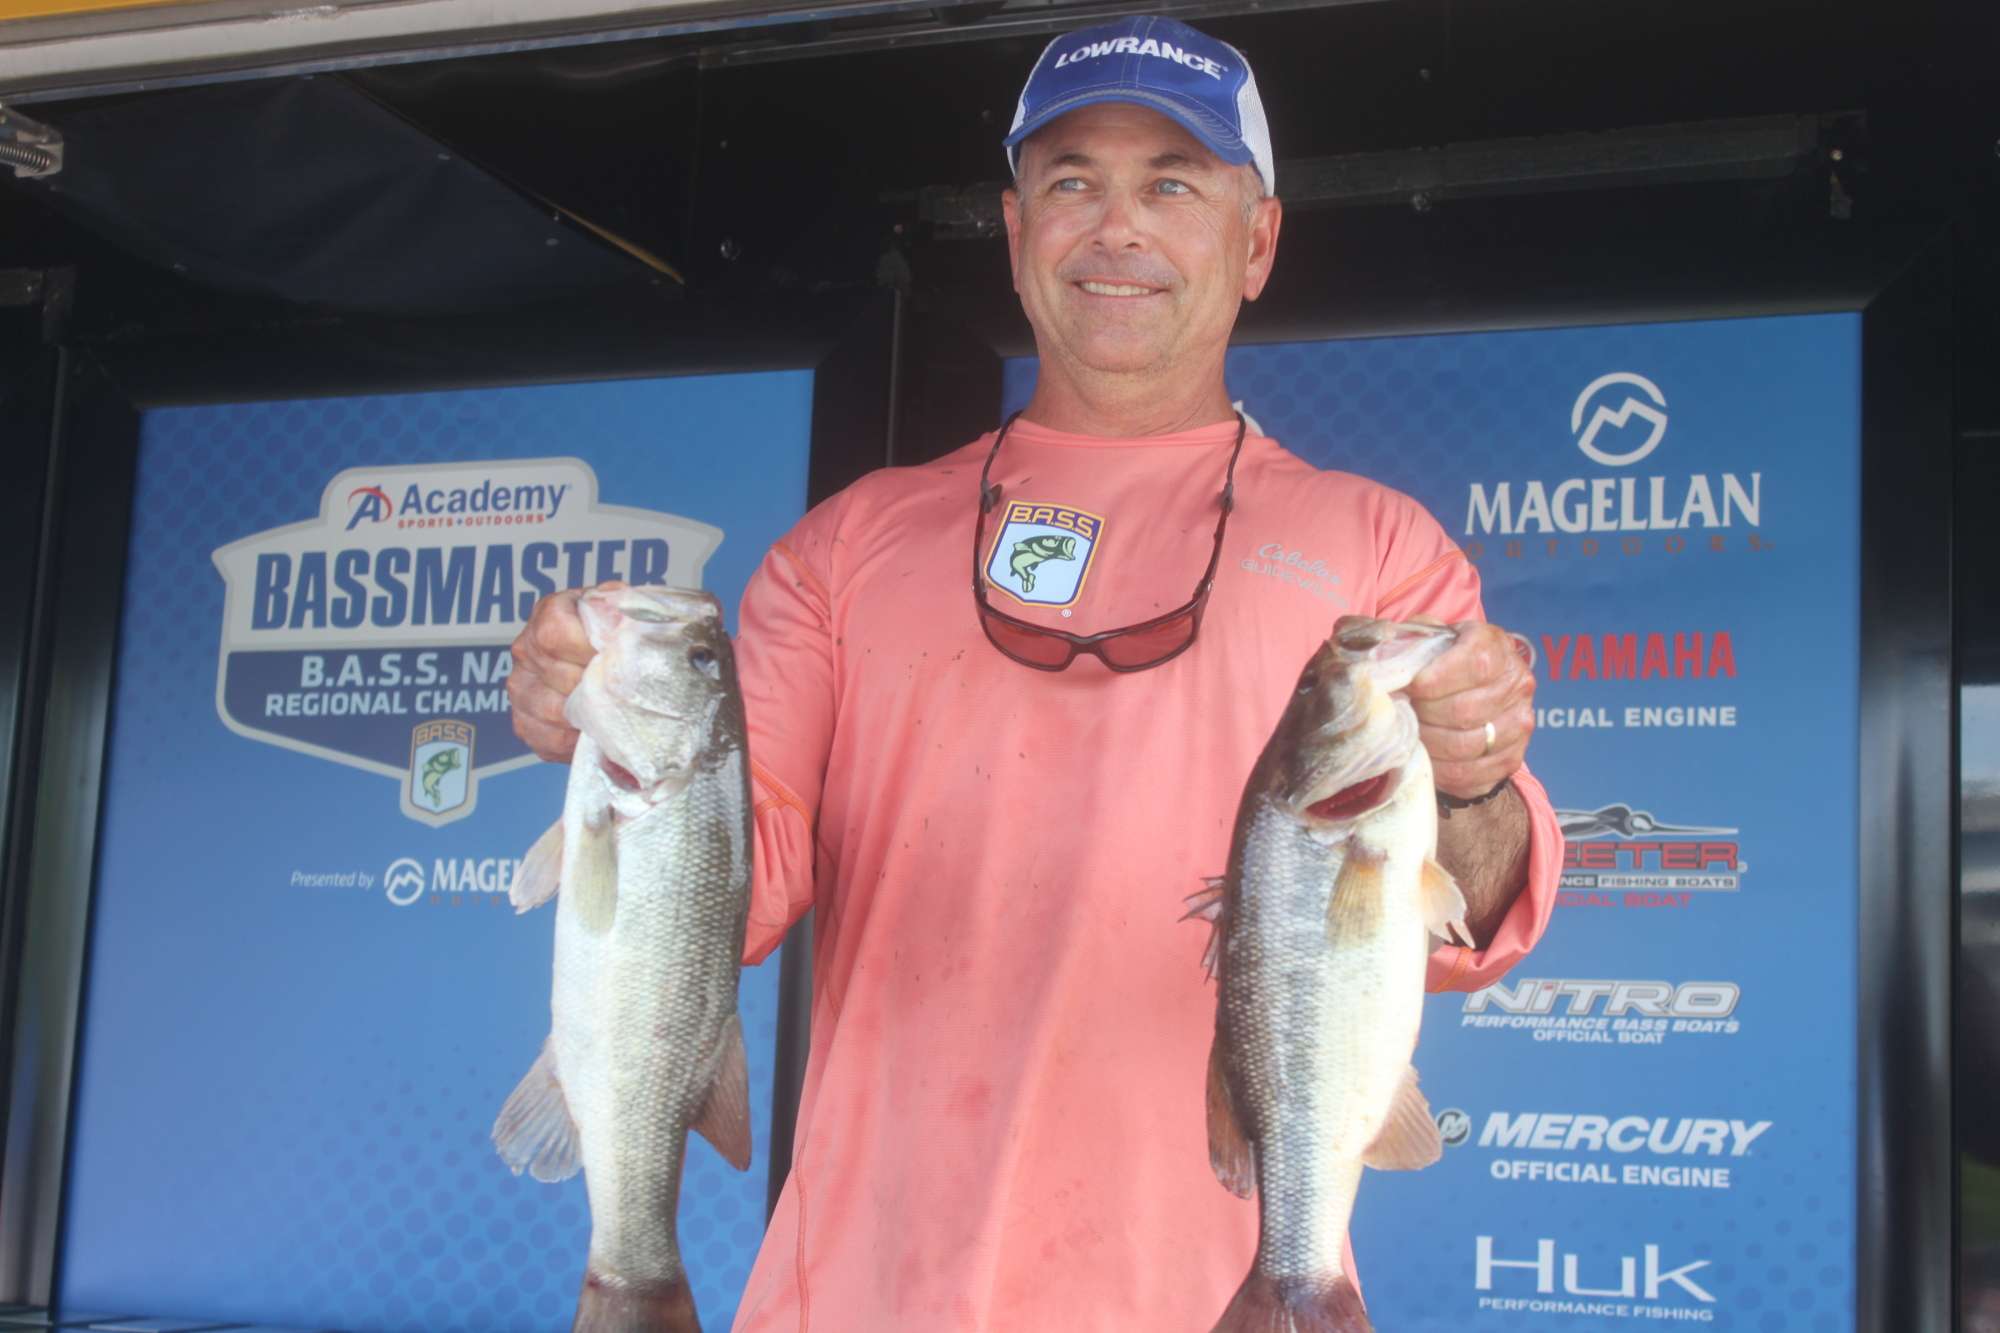 Mark Hogan of Delaware is eighth among boaters with 16-6 over two days.